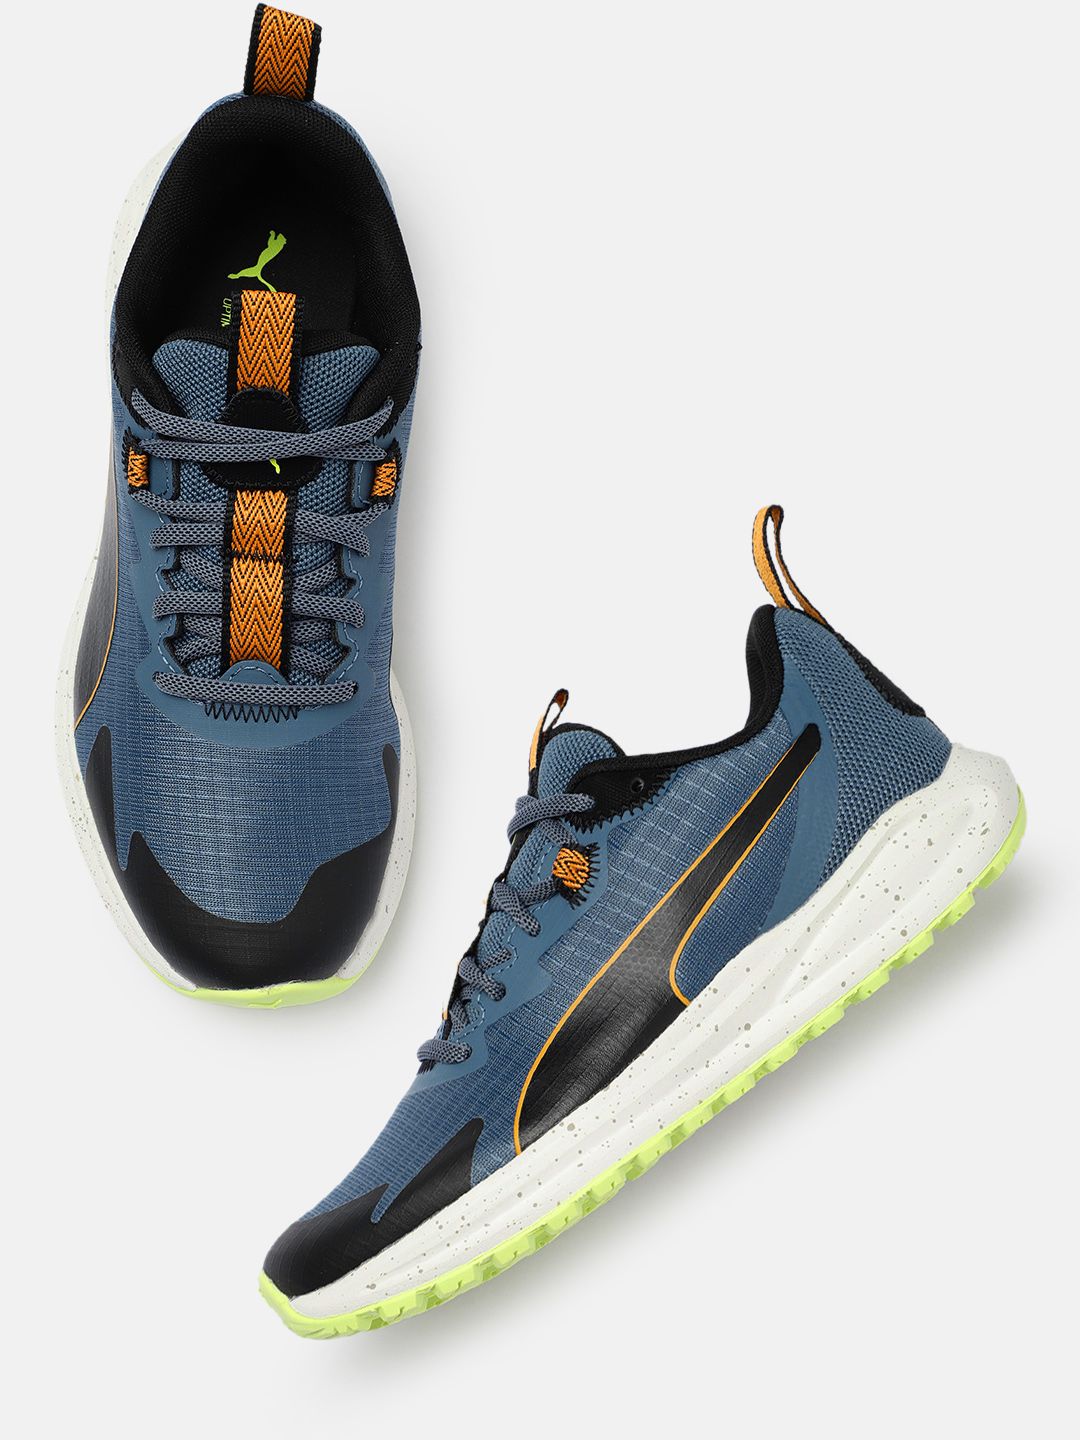 Puma Unisex Navy Blue & Black Twitch Running Shoes Price in India